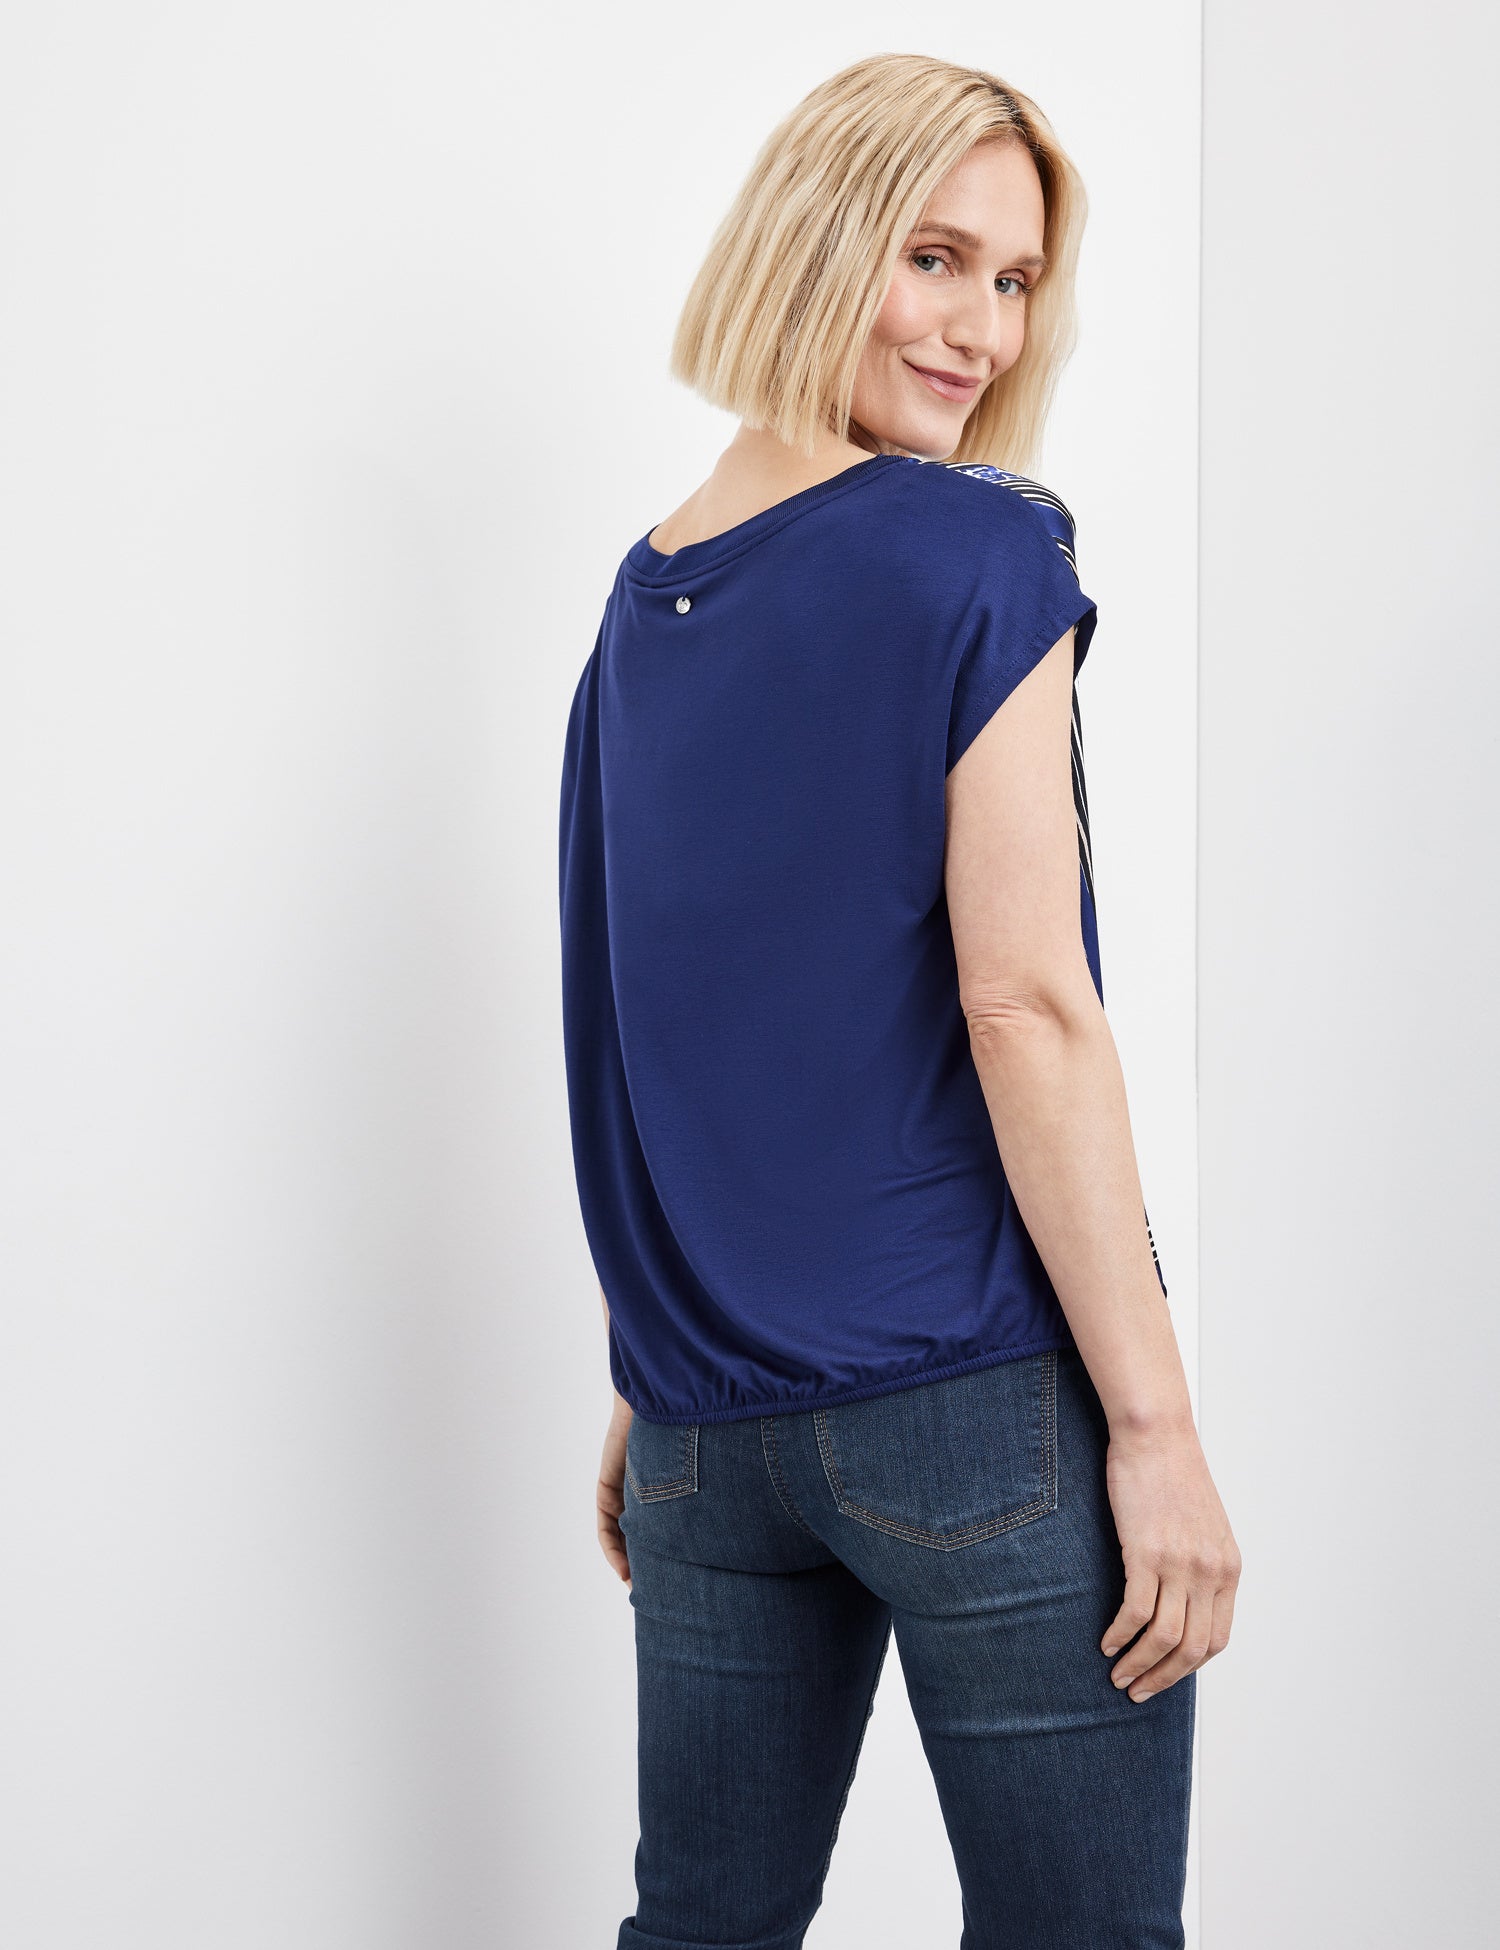 Blouse Top With A Stretchy Hem